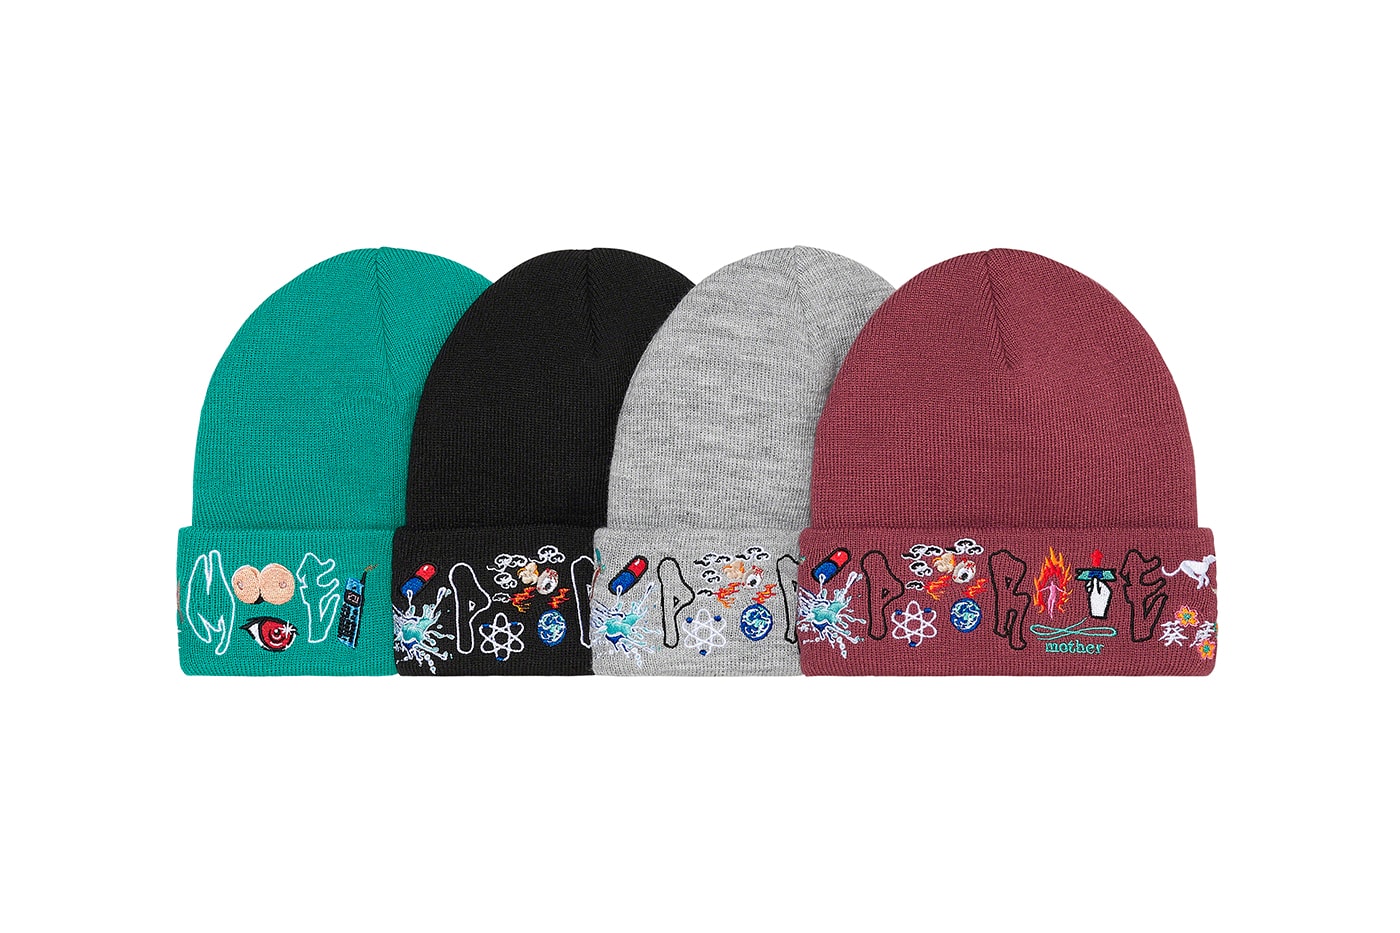 Banner Beanie - Fall/Winter 2021 Preview – Supreme